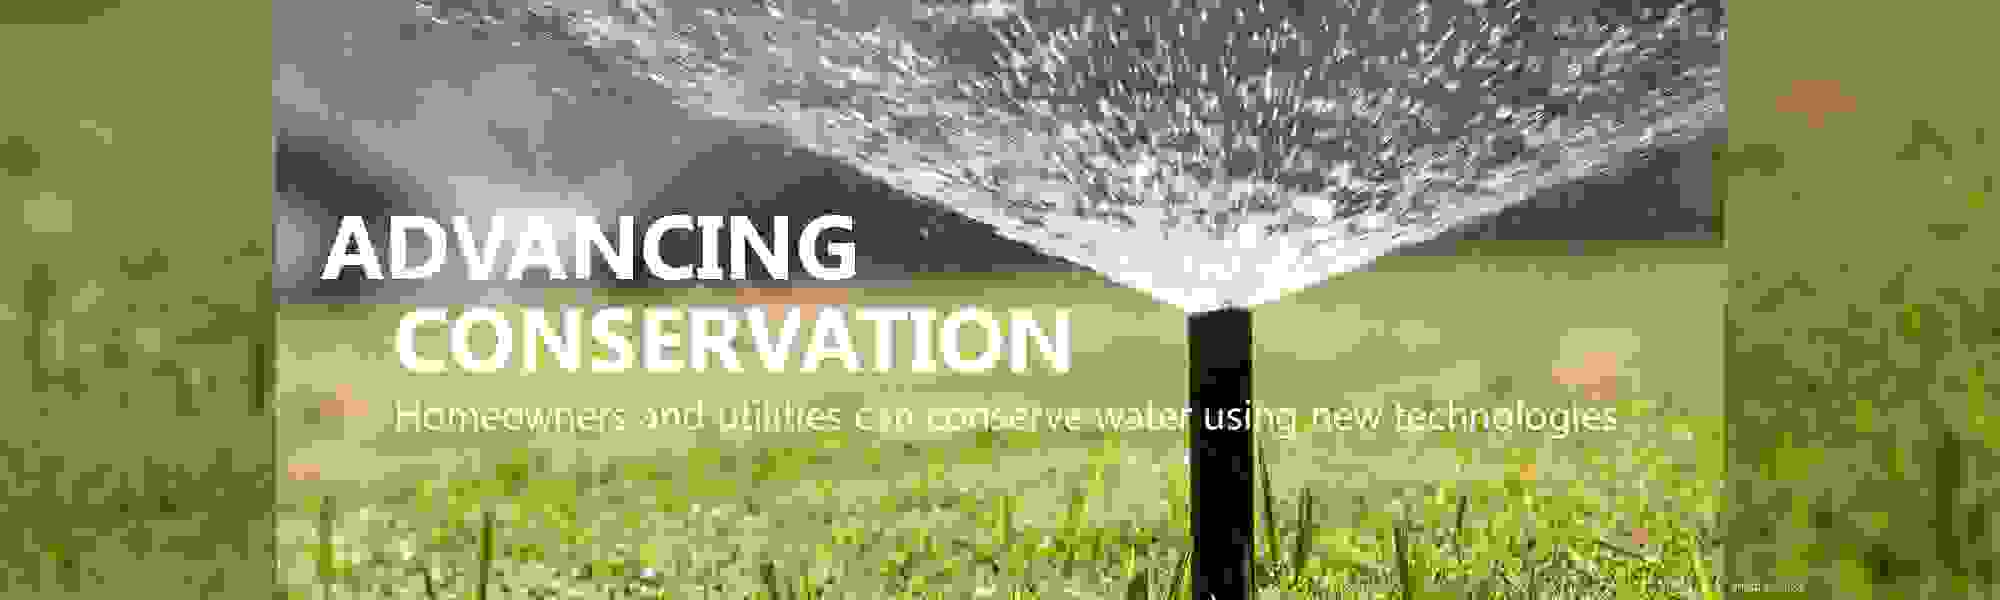 Advancing conservation